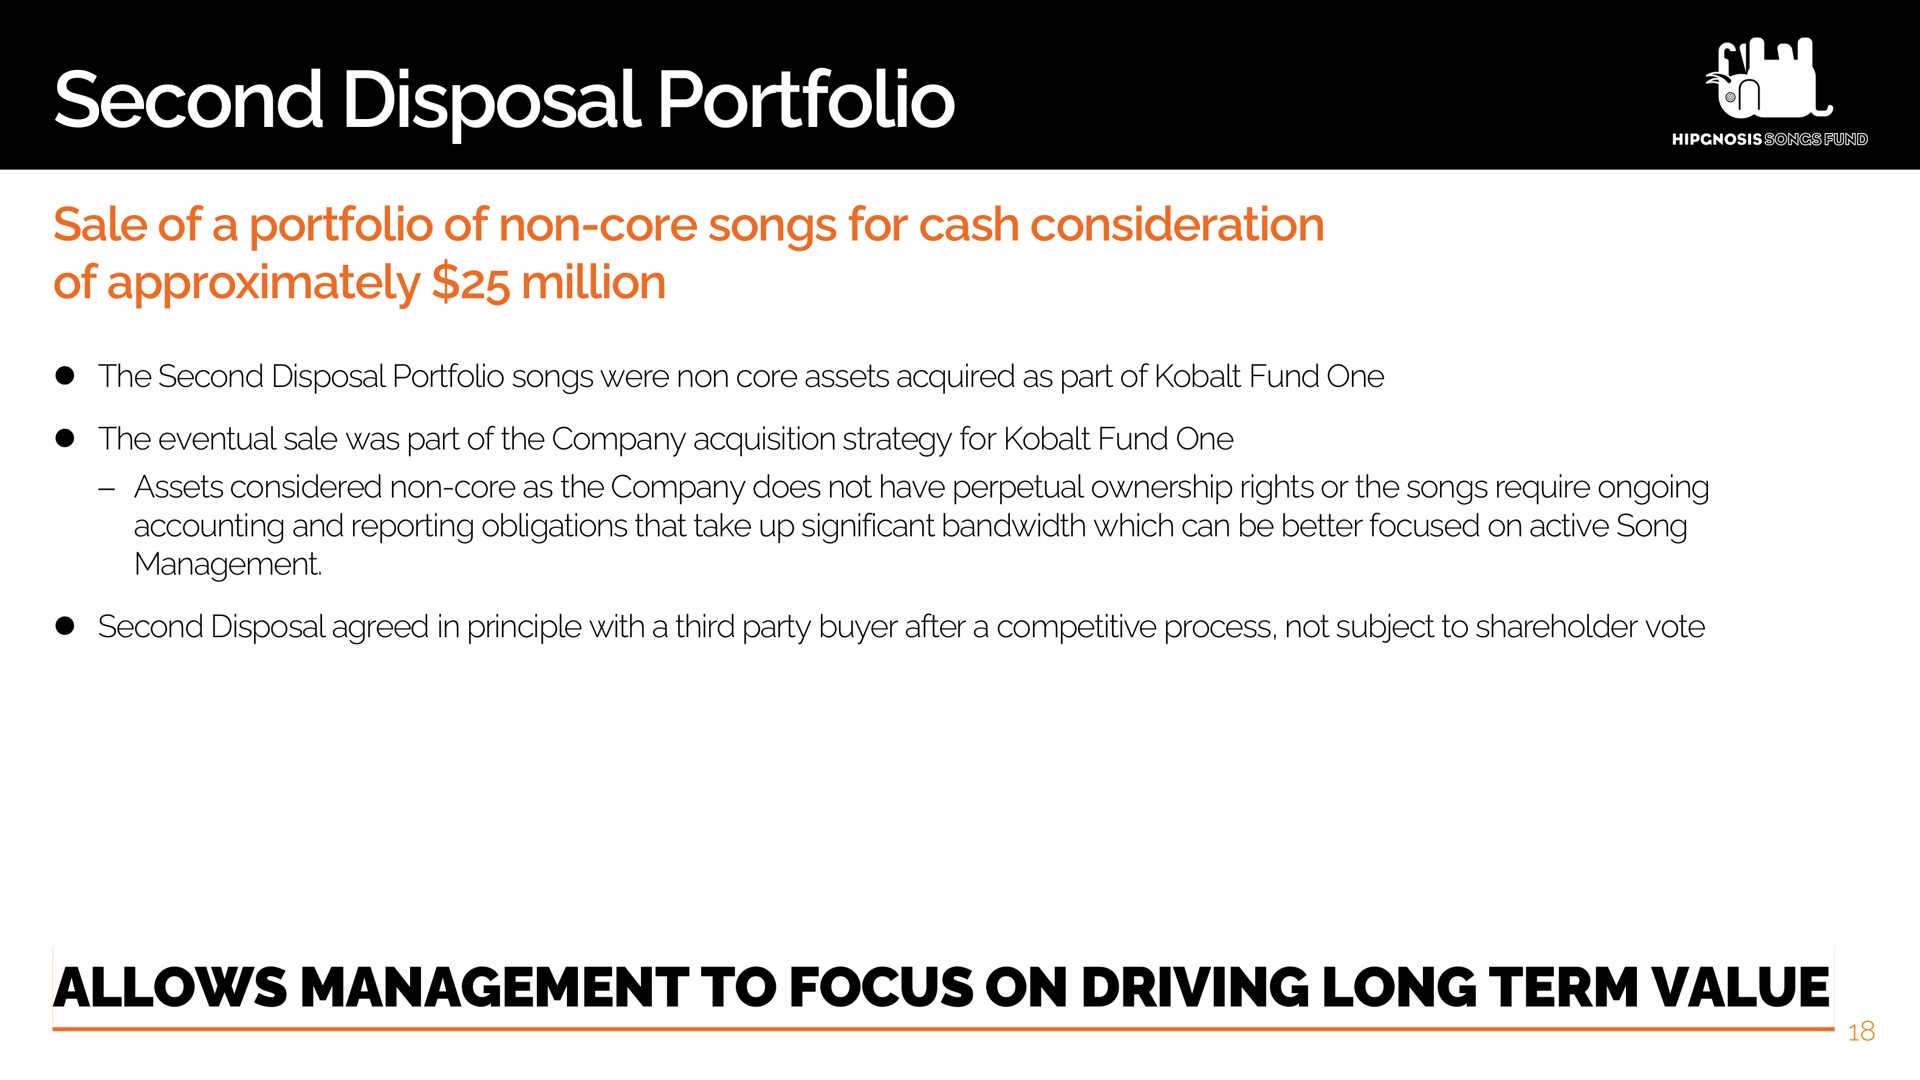 second disposal portfolio allows management to focus on driving long term value | Hipgnosis Songs Fund